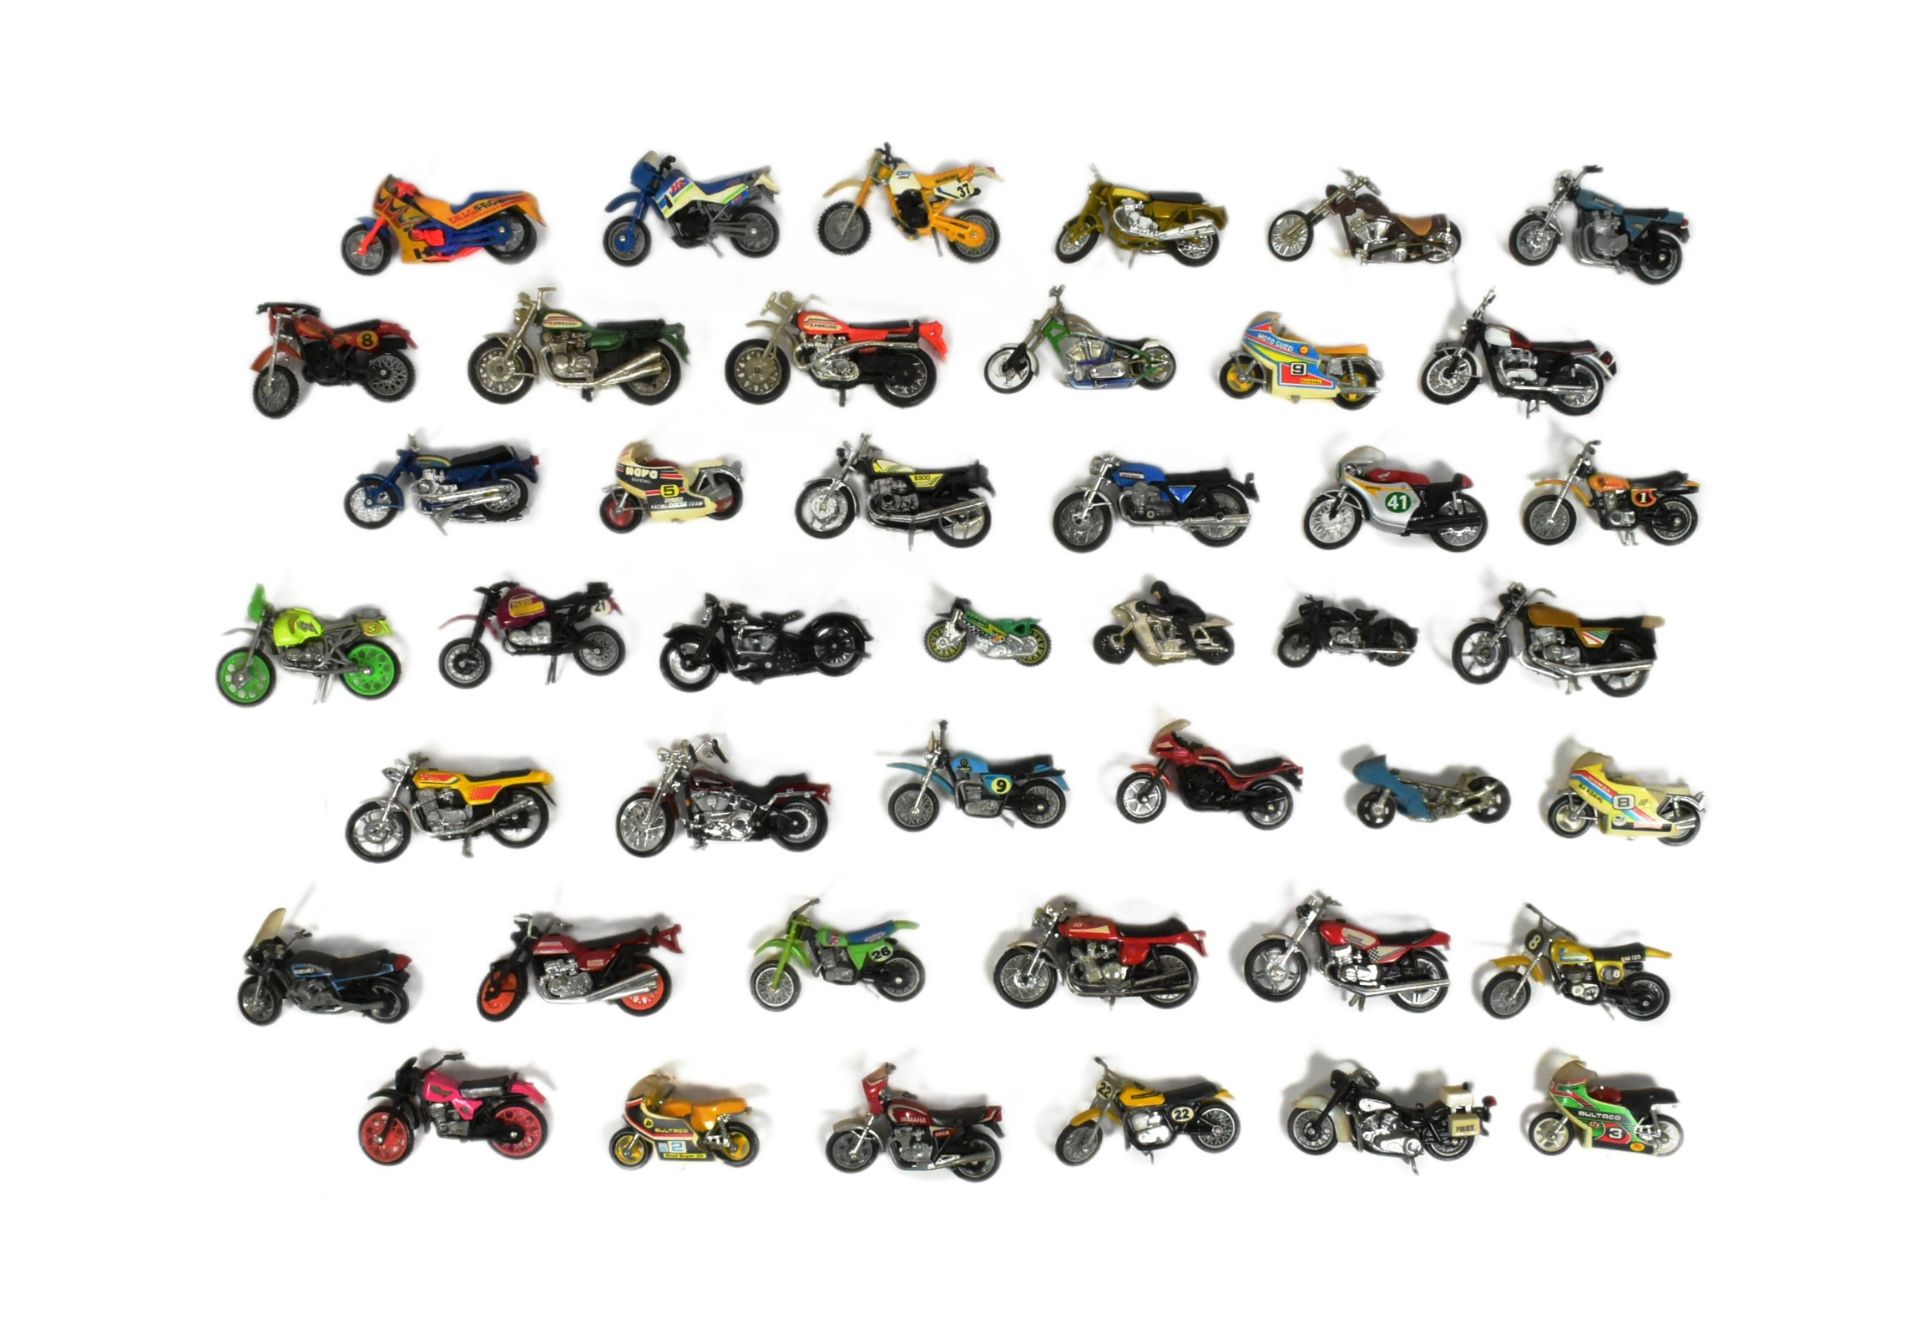 DIECAST - COLLECTION OF 1/32 SCALE DIECAST MODEL MOTORCYCLES